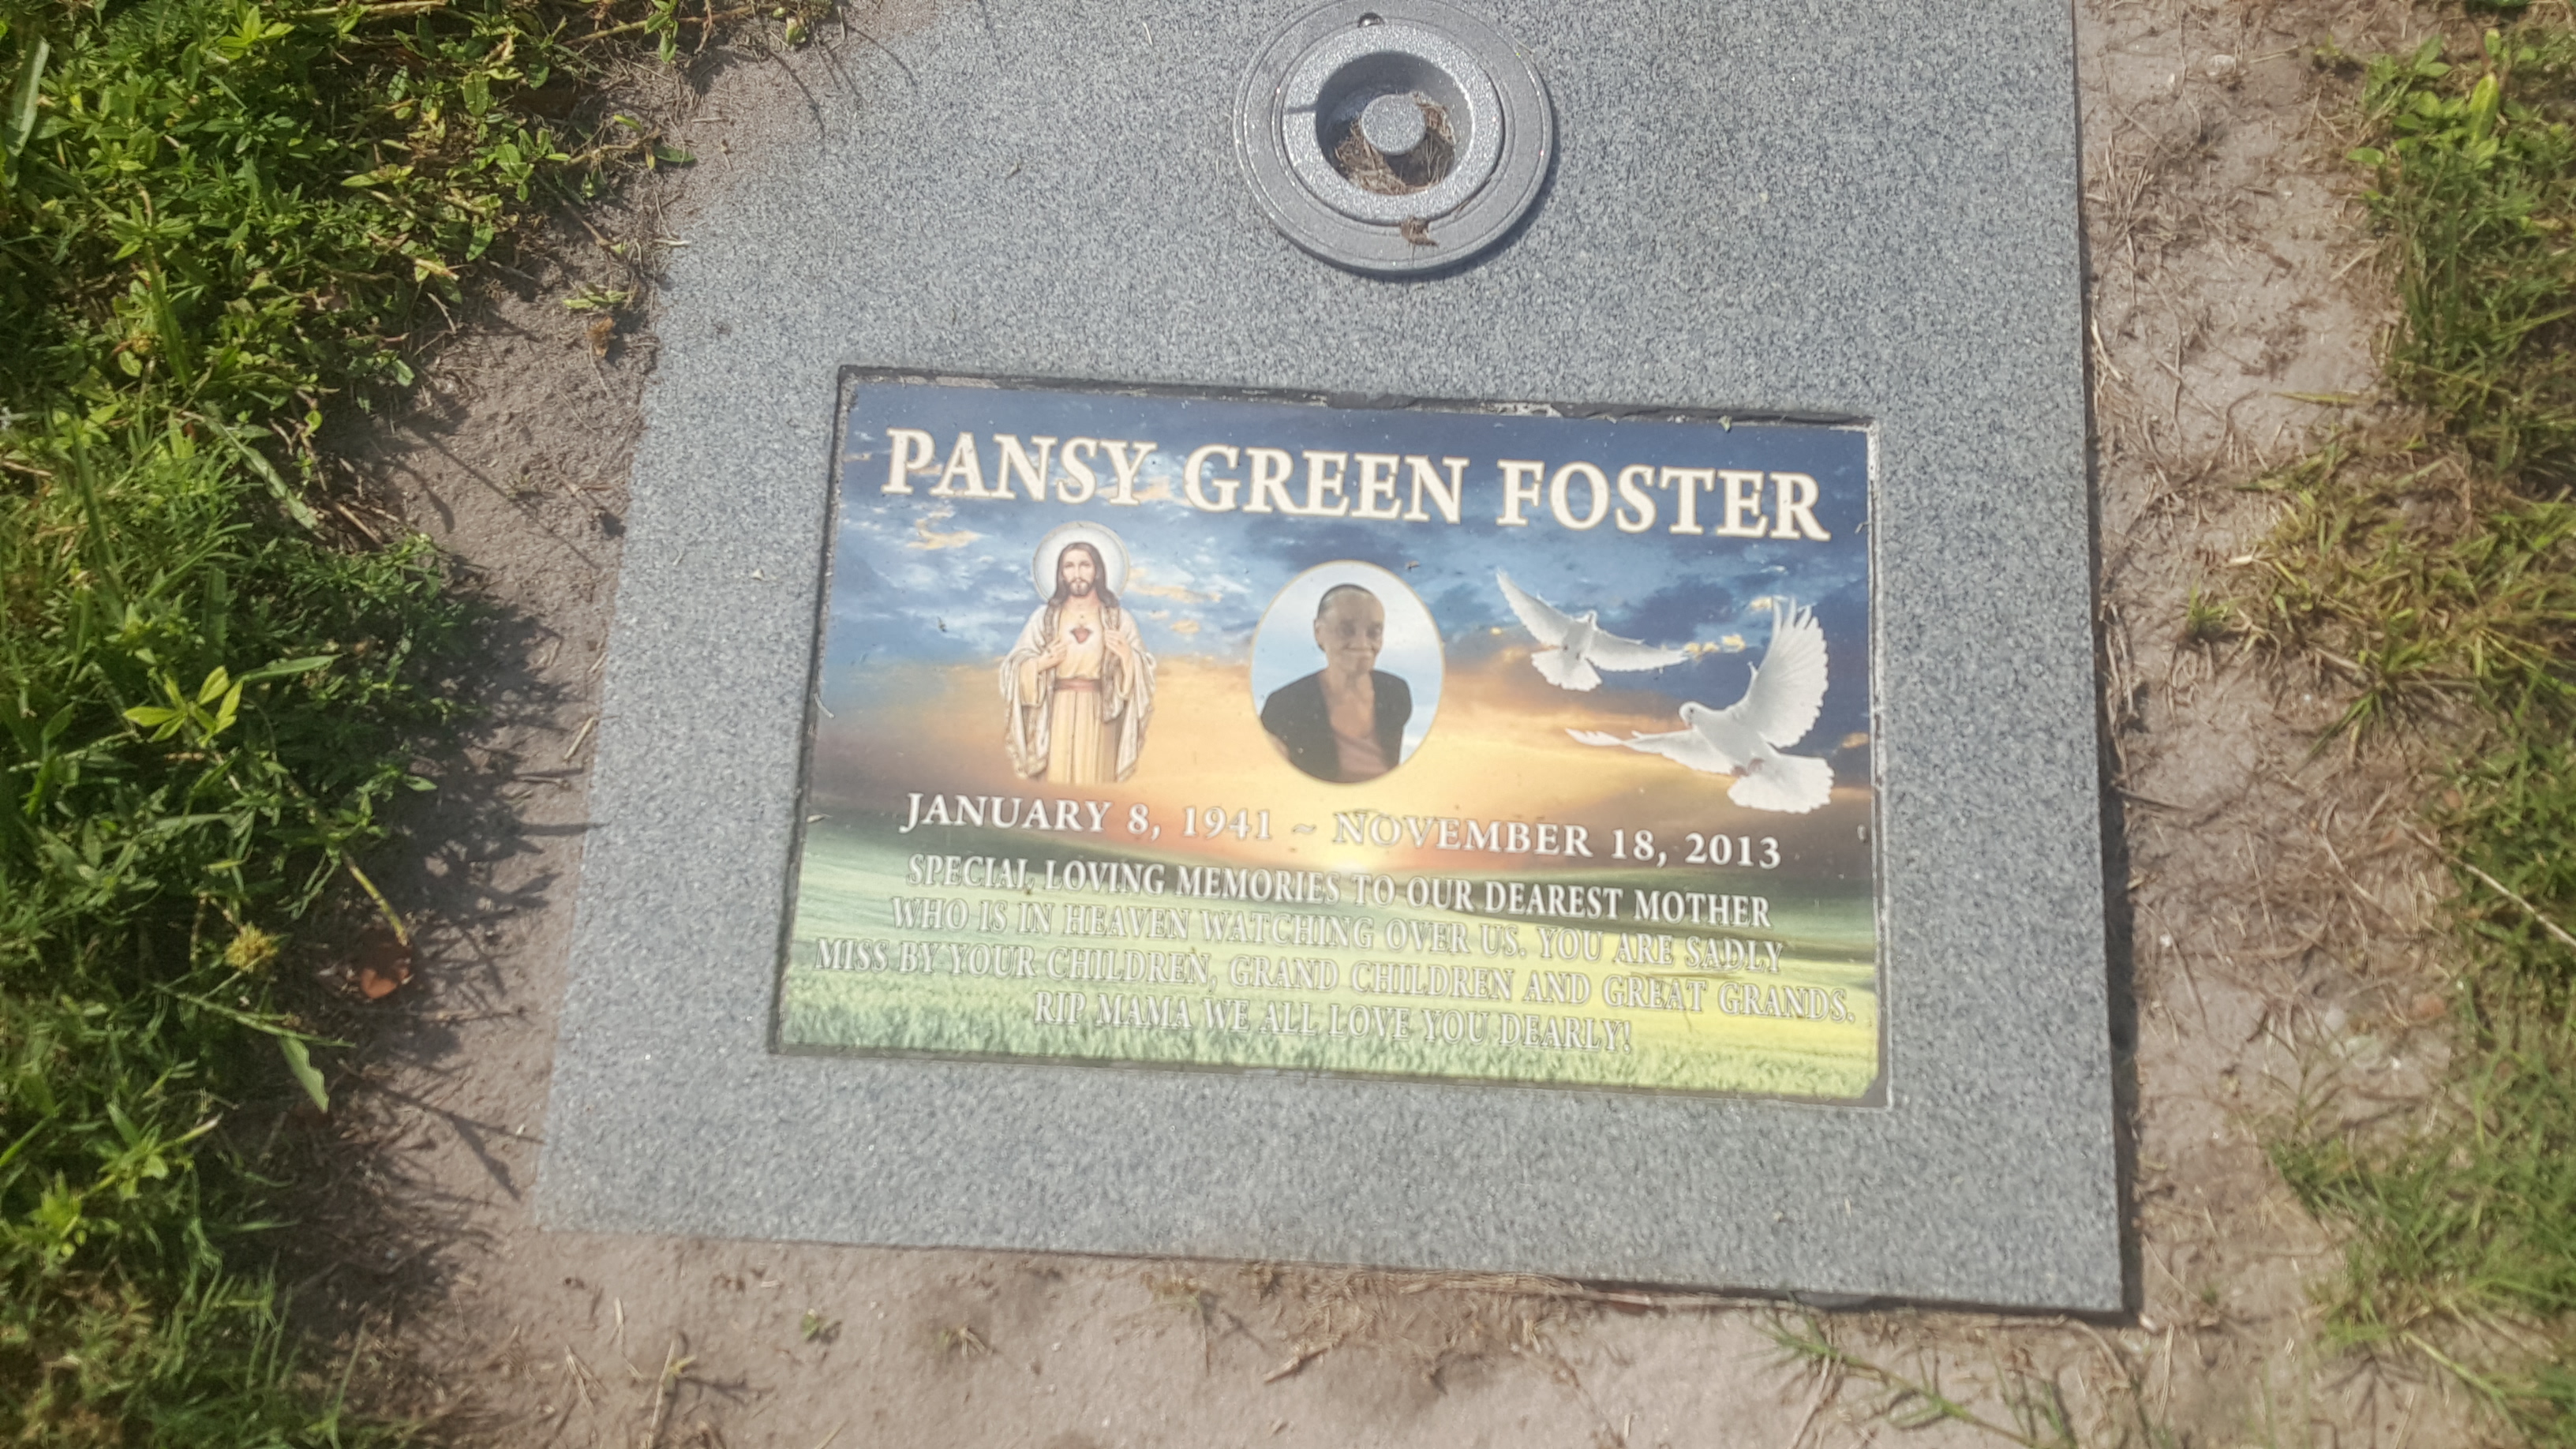 Pansy Green Foster